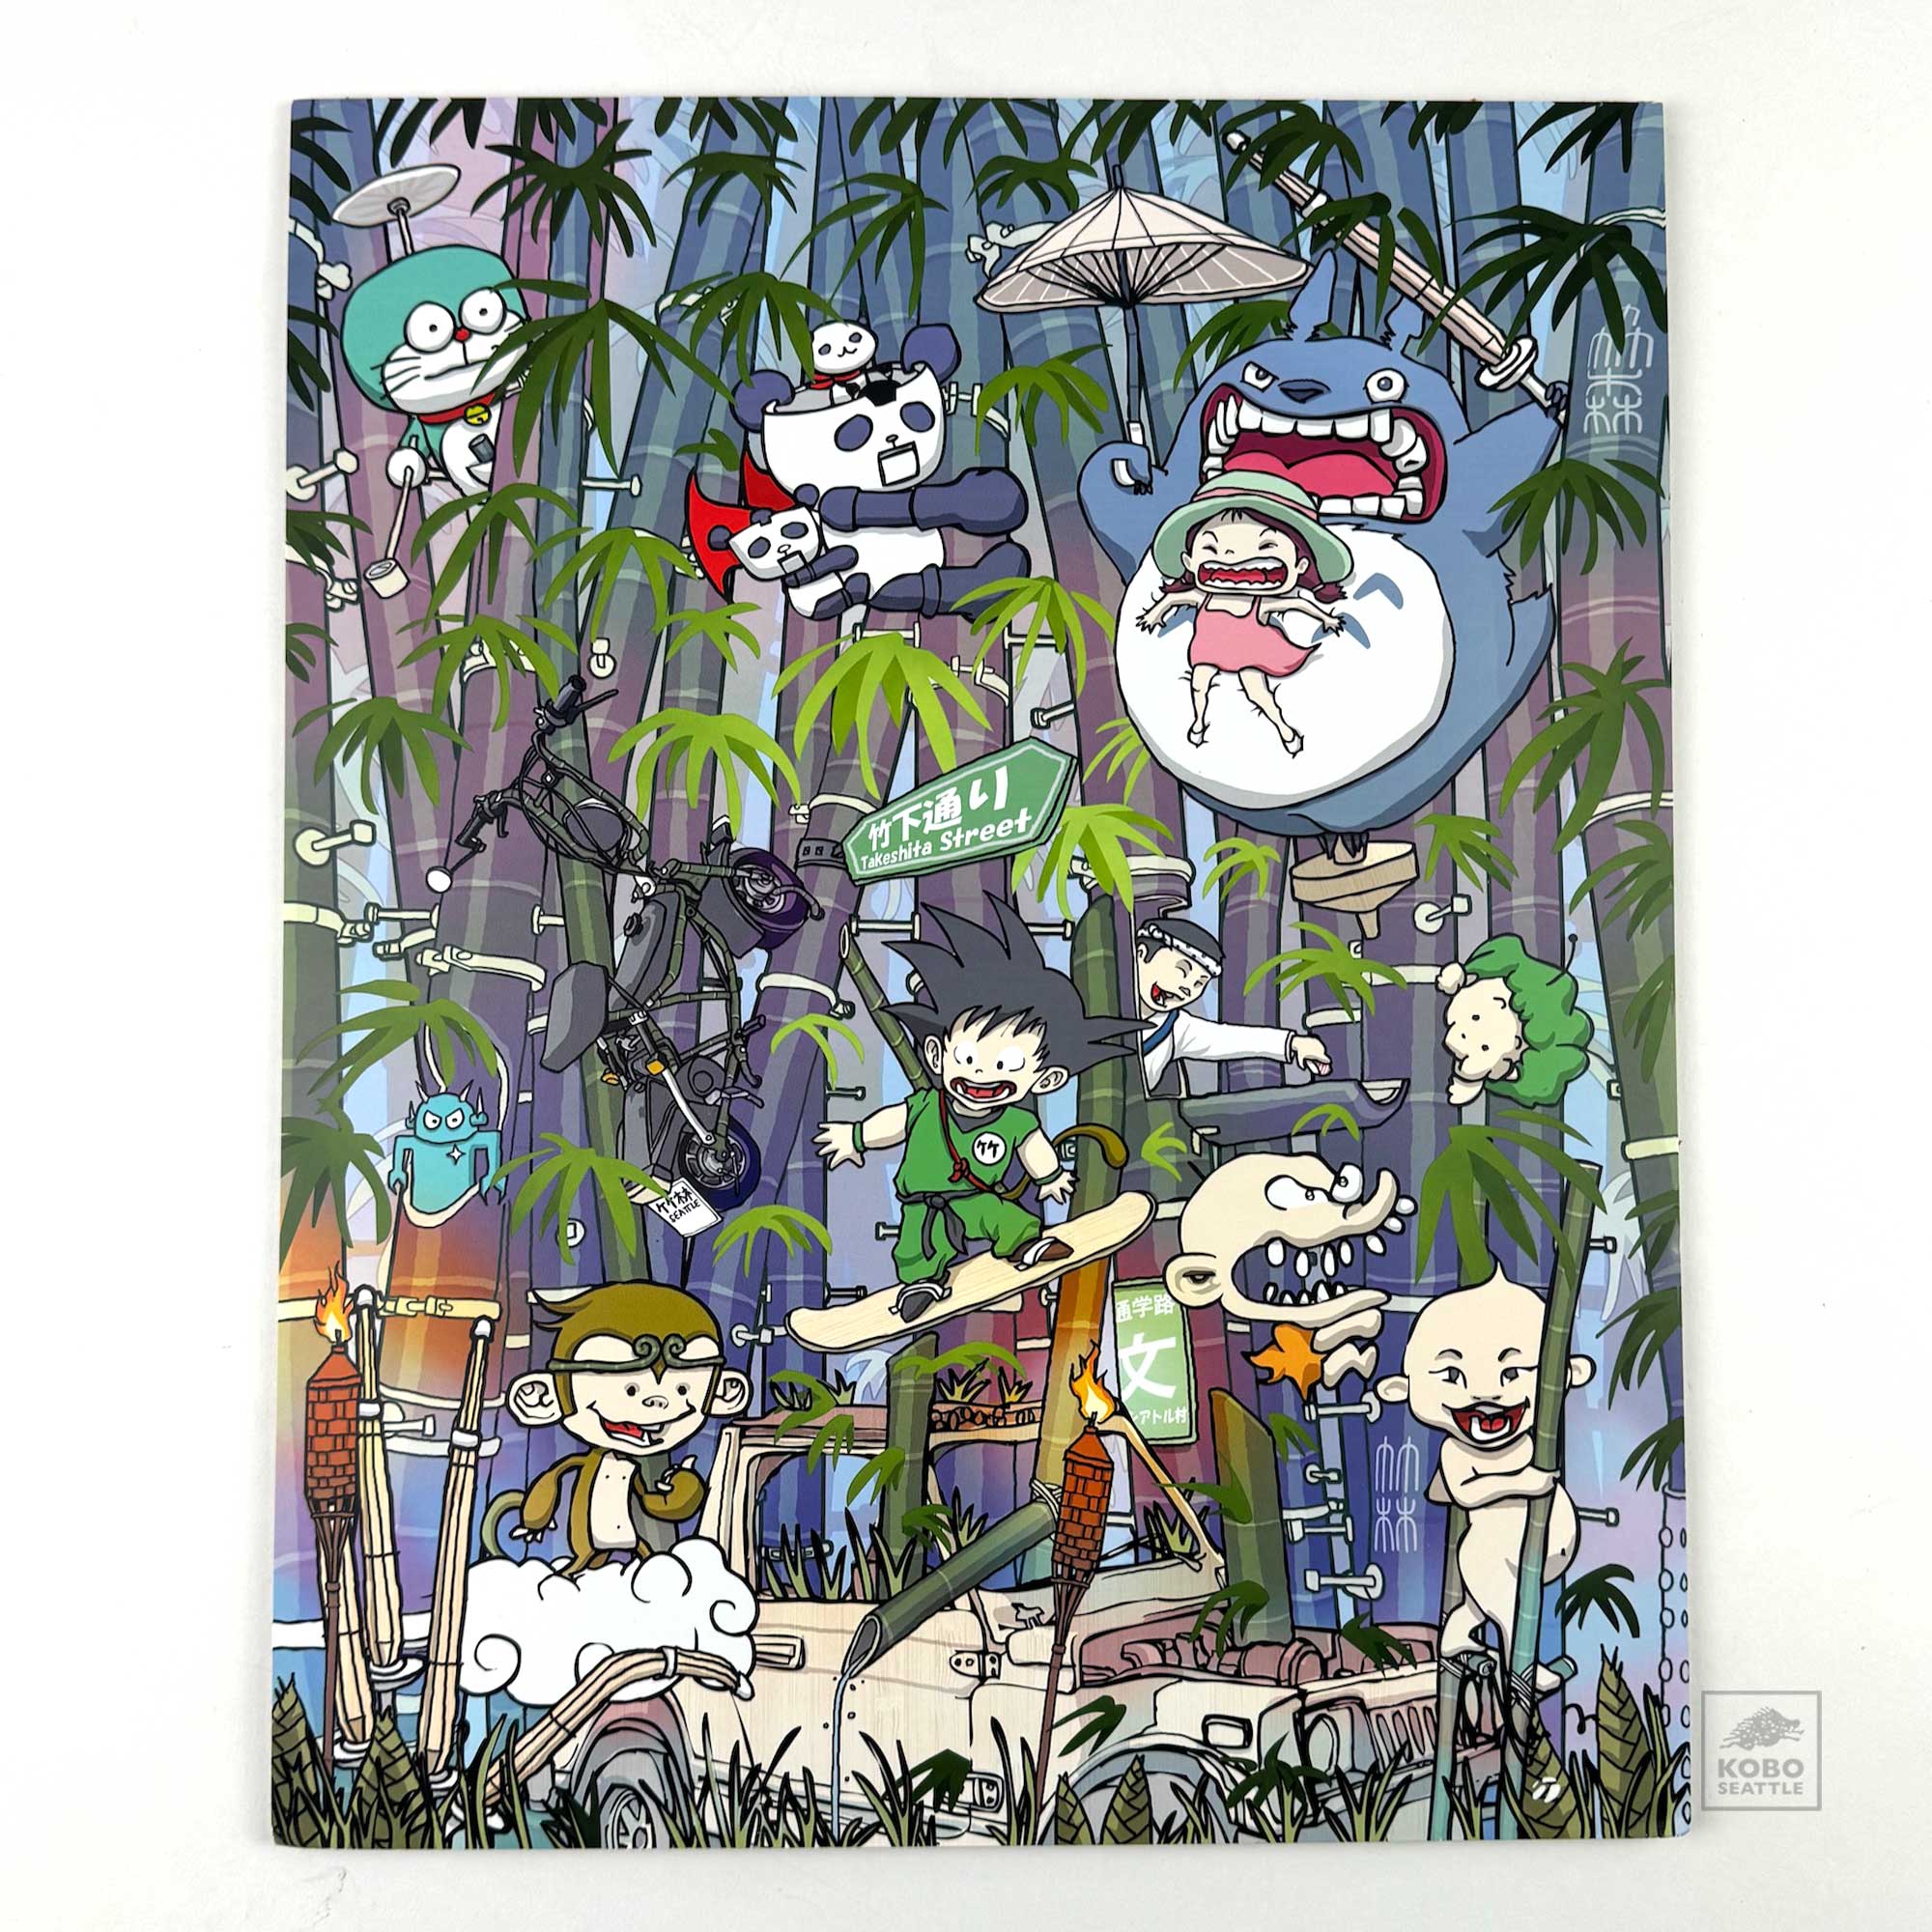 Enfu Print "Takeboo Forest Giant Robbot"